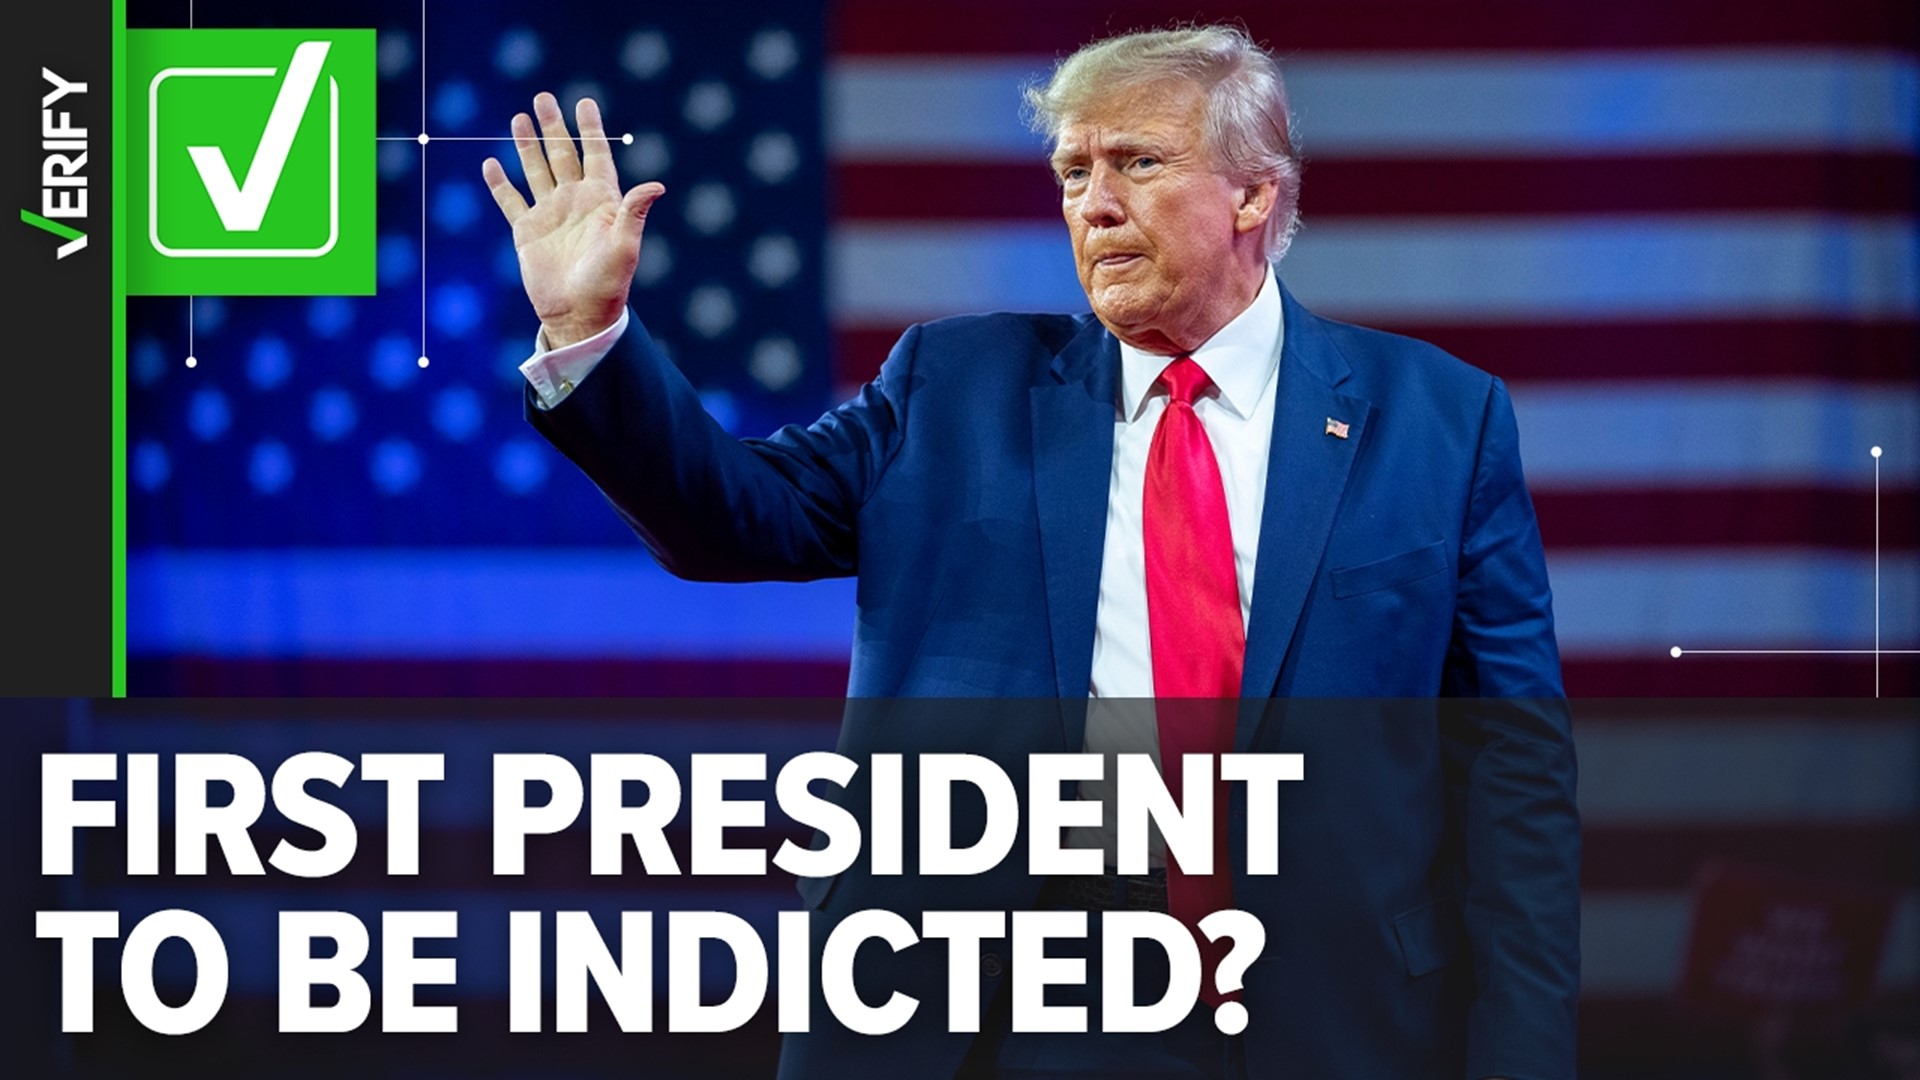 Donald Trump is now the first former president to be criminally indicted. Richard Nixon and Bill Clinton came close, but were not charged or prosecuted.